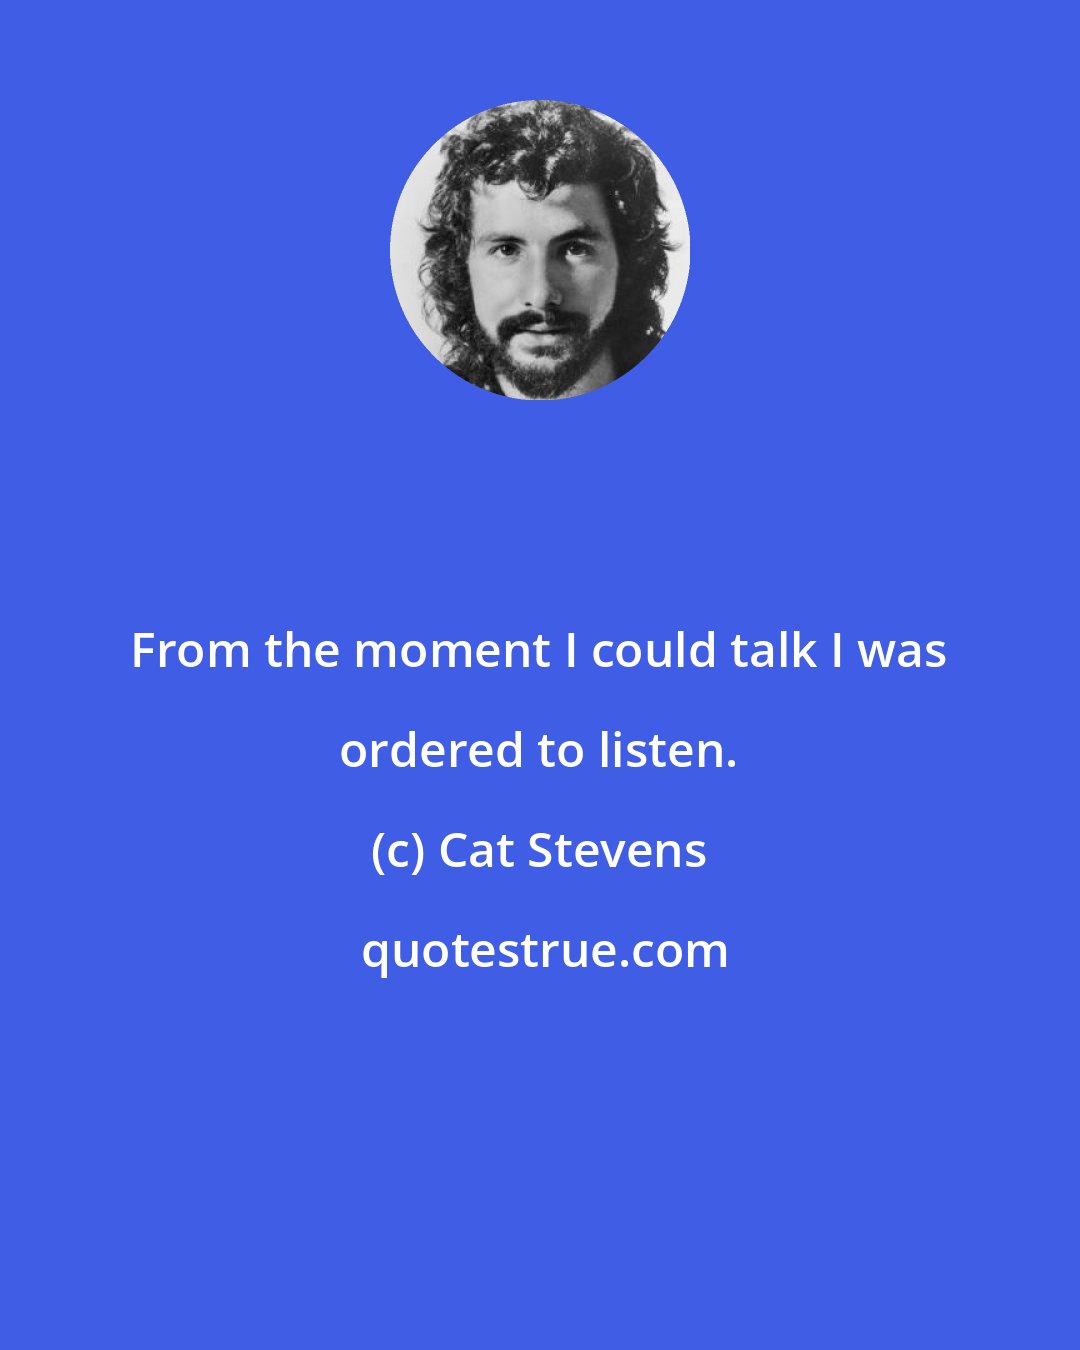 Cat Stevens: From the moment I could talk I was ordered to listen.